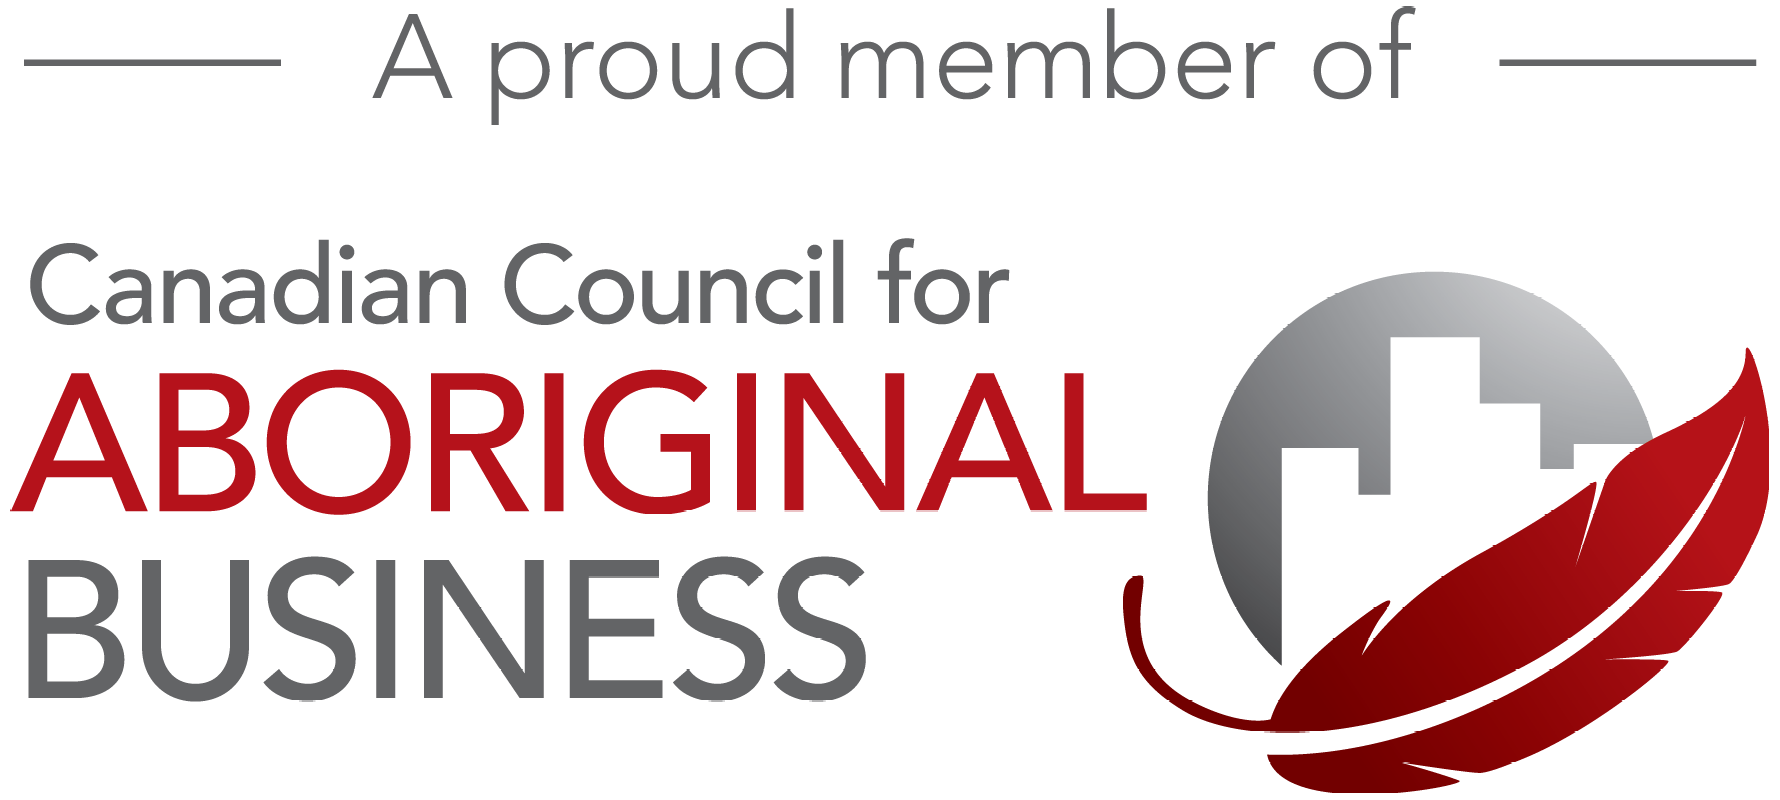 A Proud Member of Canadian Council for Aboriginal Business